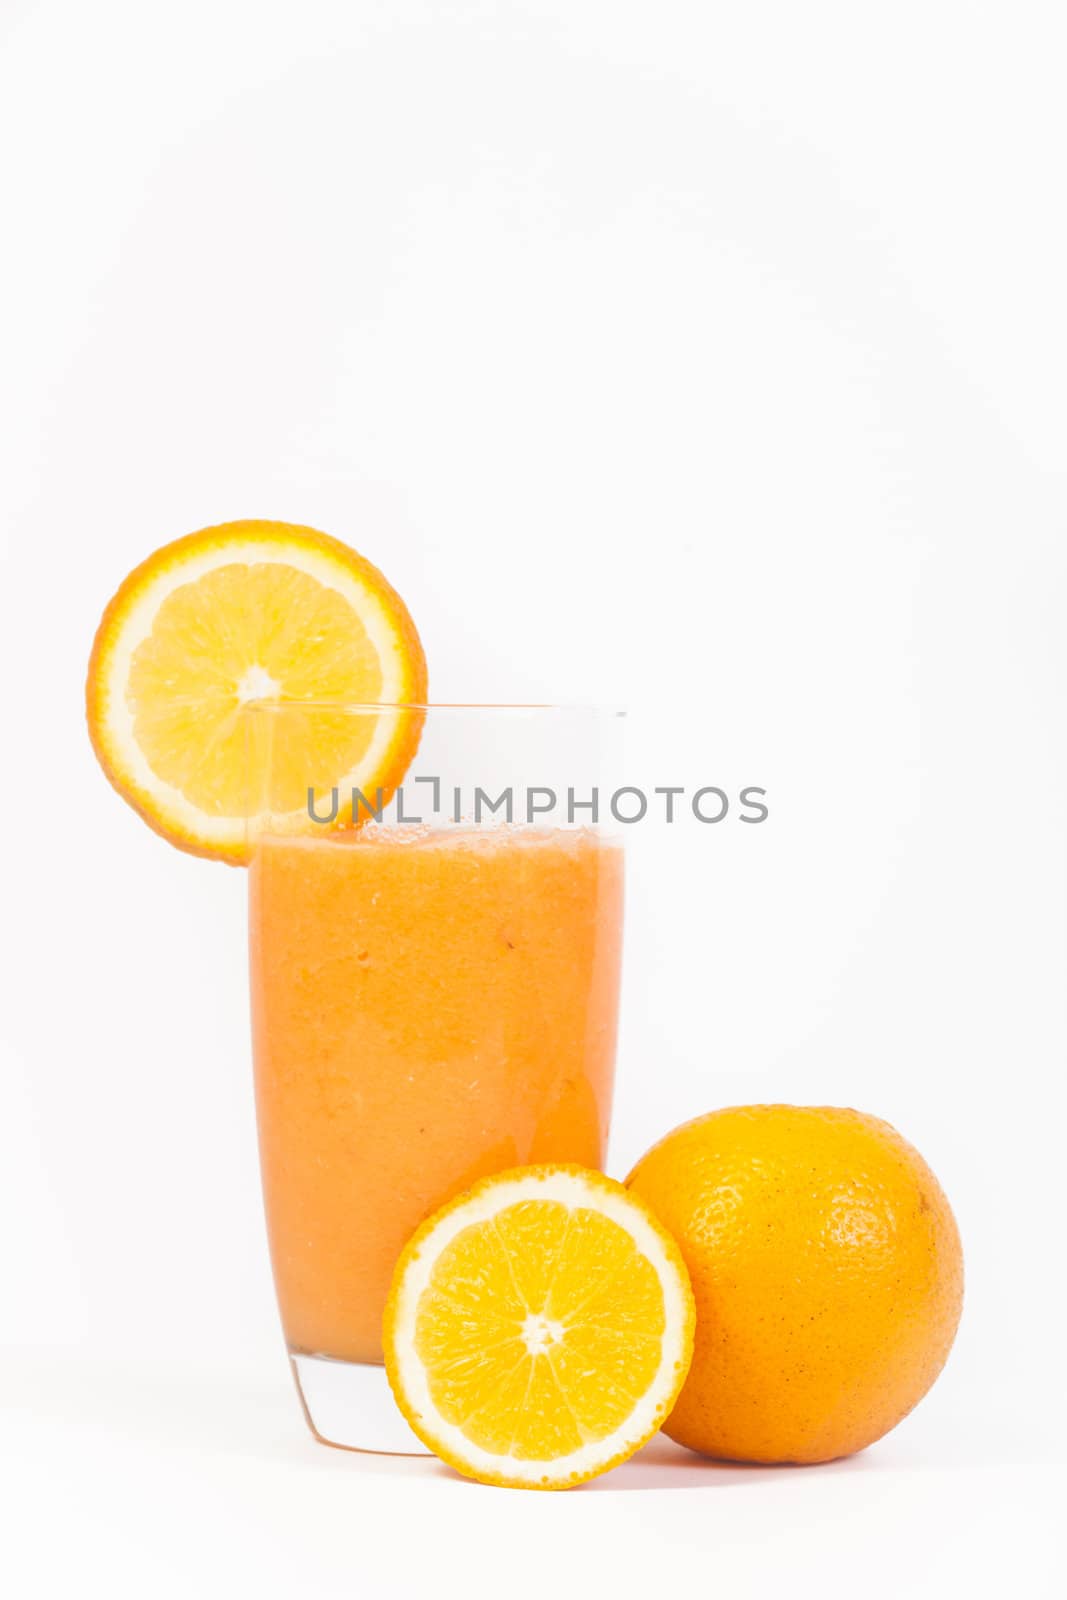 A delicious glass of natural orange juice isolated on a white background.